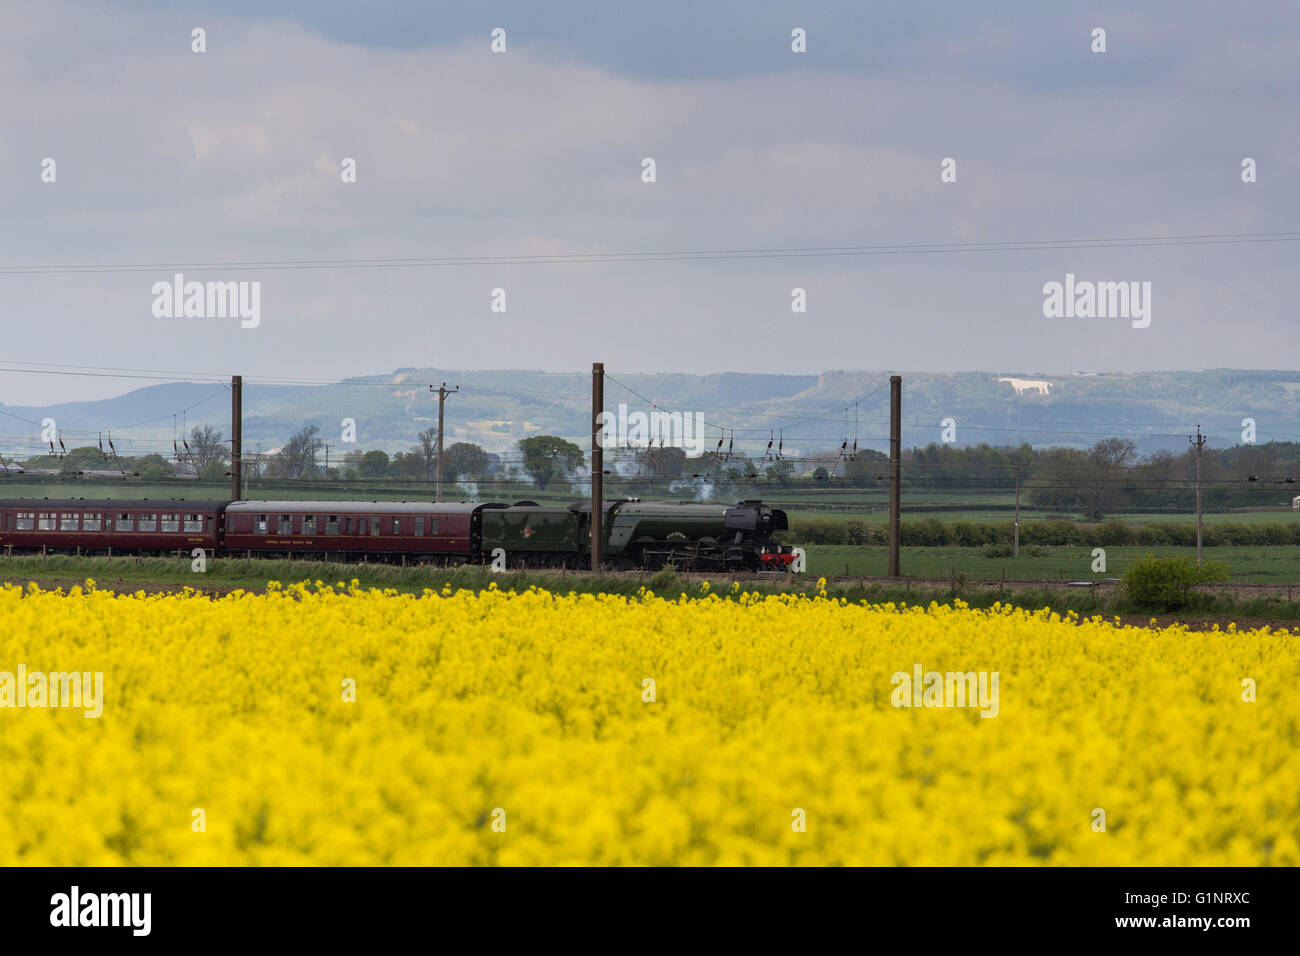 Raskelf, North Yorkshire. 17 May 2016. The Flying Scotsman, a Pacific steam locomotive originally built in 1923, passes through fields nearby Raskelf, North Yorkshire, as it makes a return journey south from Edinburgh to York, on 17 May 2016. Credit:  Harry Whitehead/Alamy Live News Stock Photo